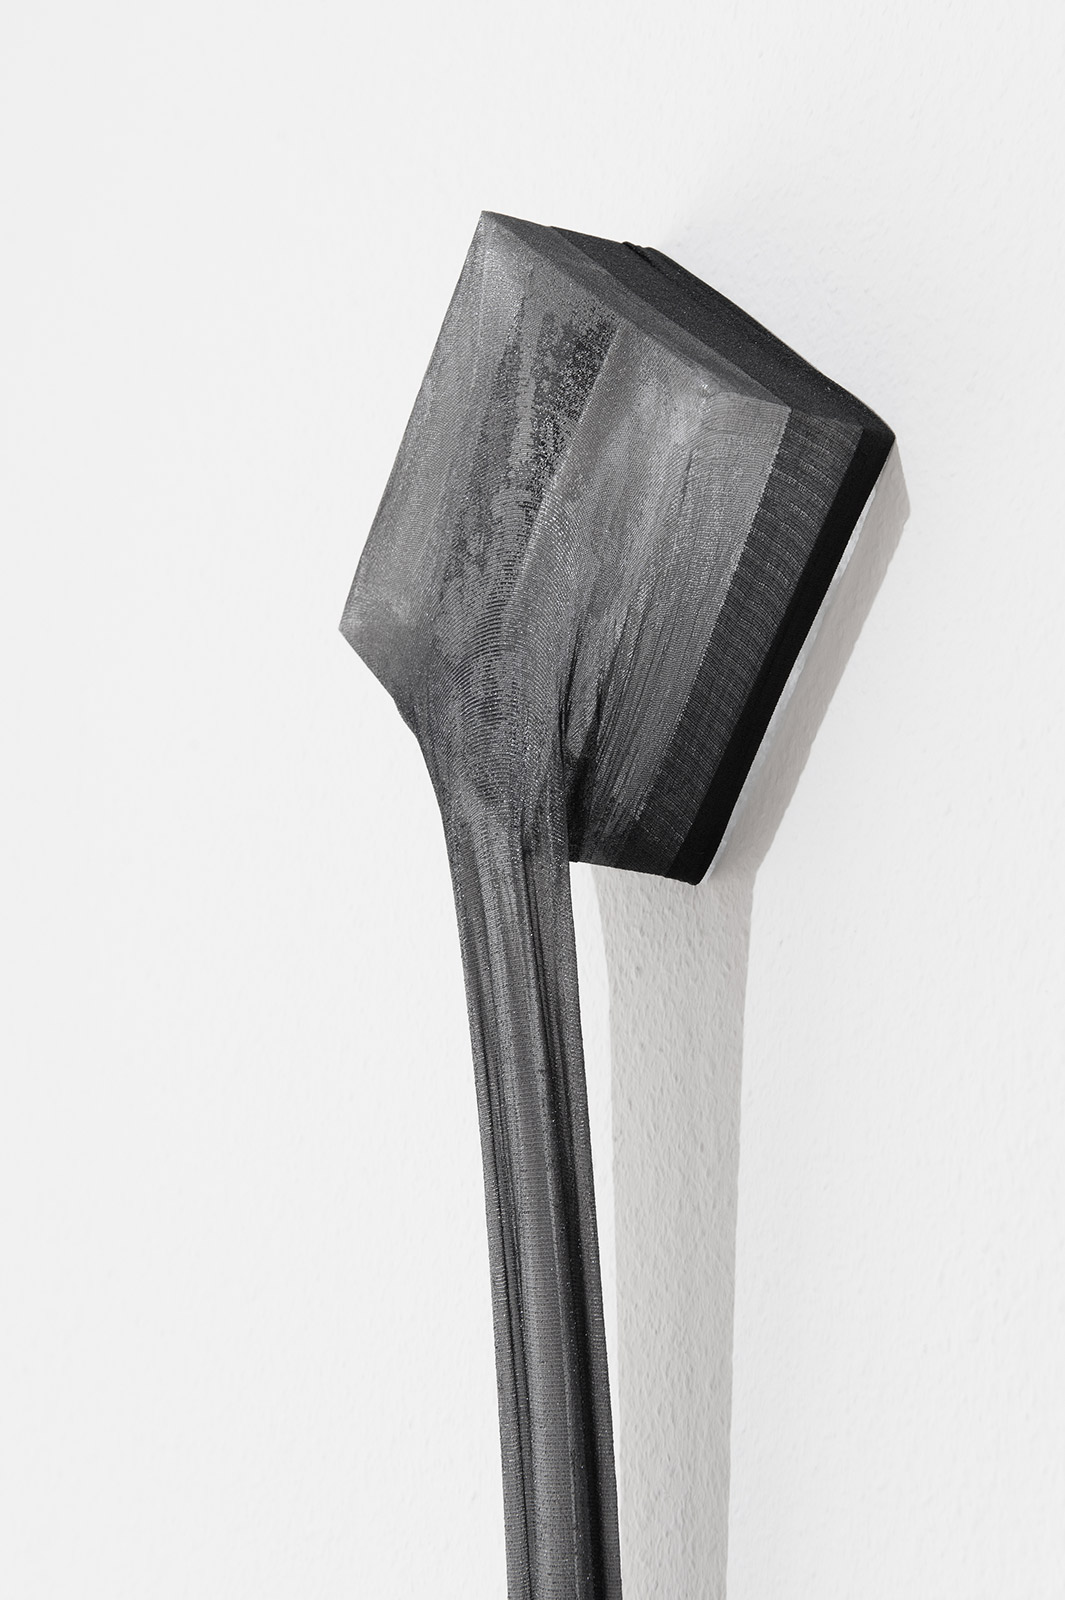 Detail view of an art object made from a stretched black polyamide stocking and epoxy resin